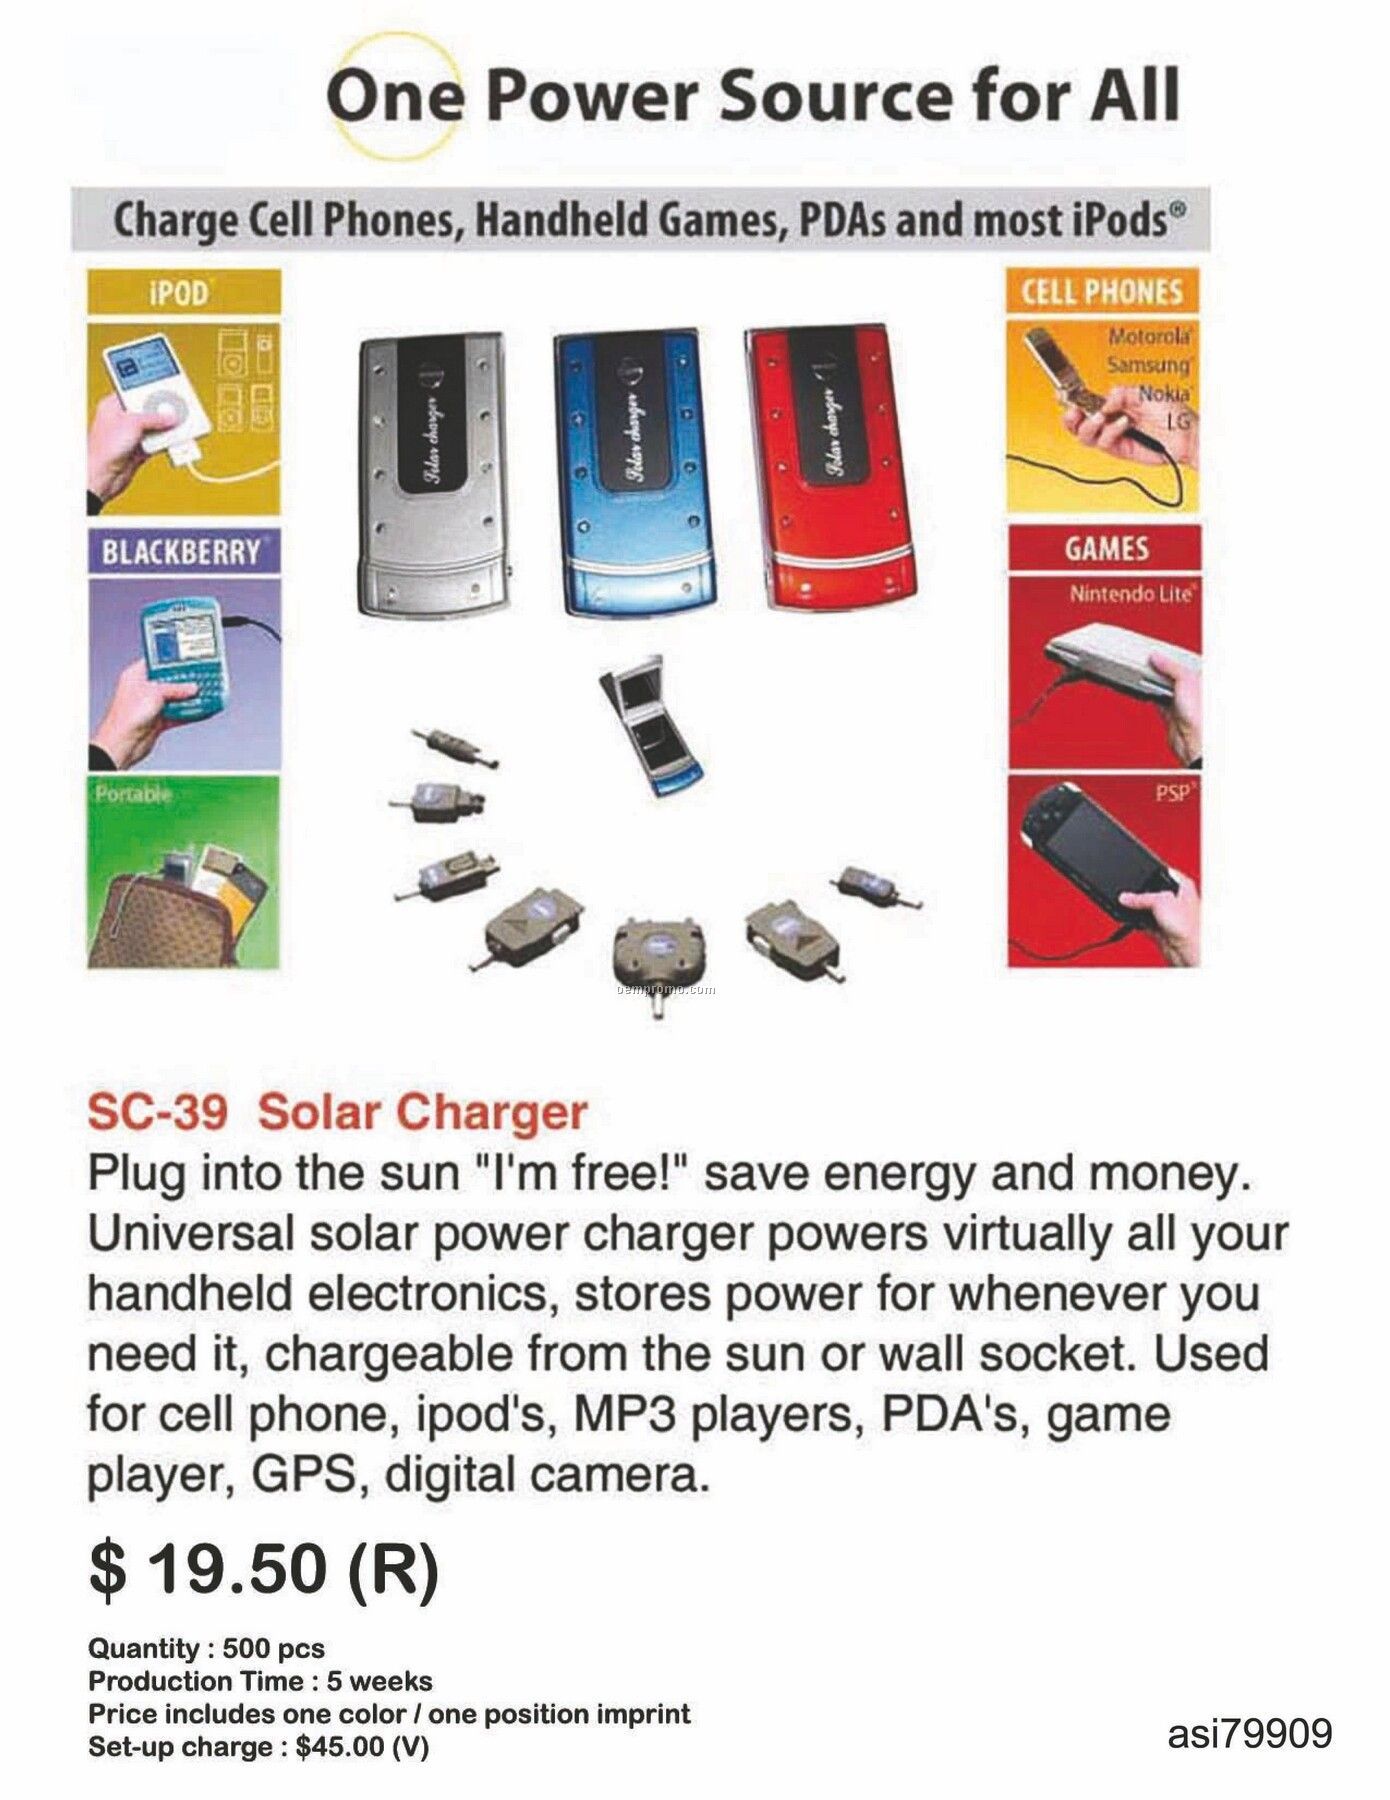 Universal Solar Charger For Iphone, Ipod, Blackberry, Android, Htc